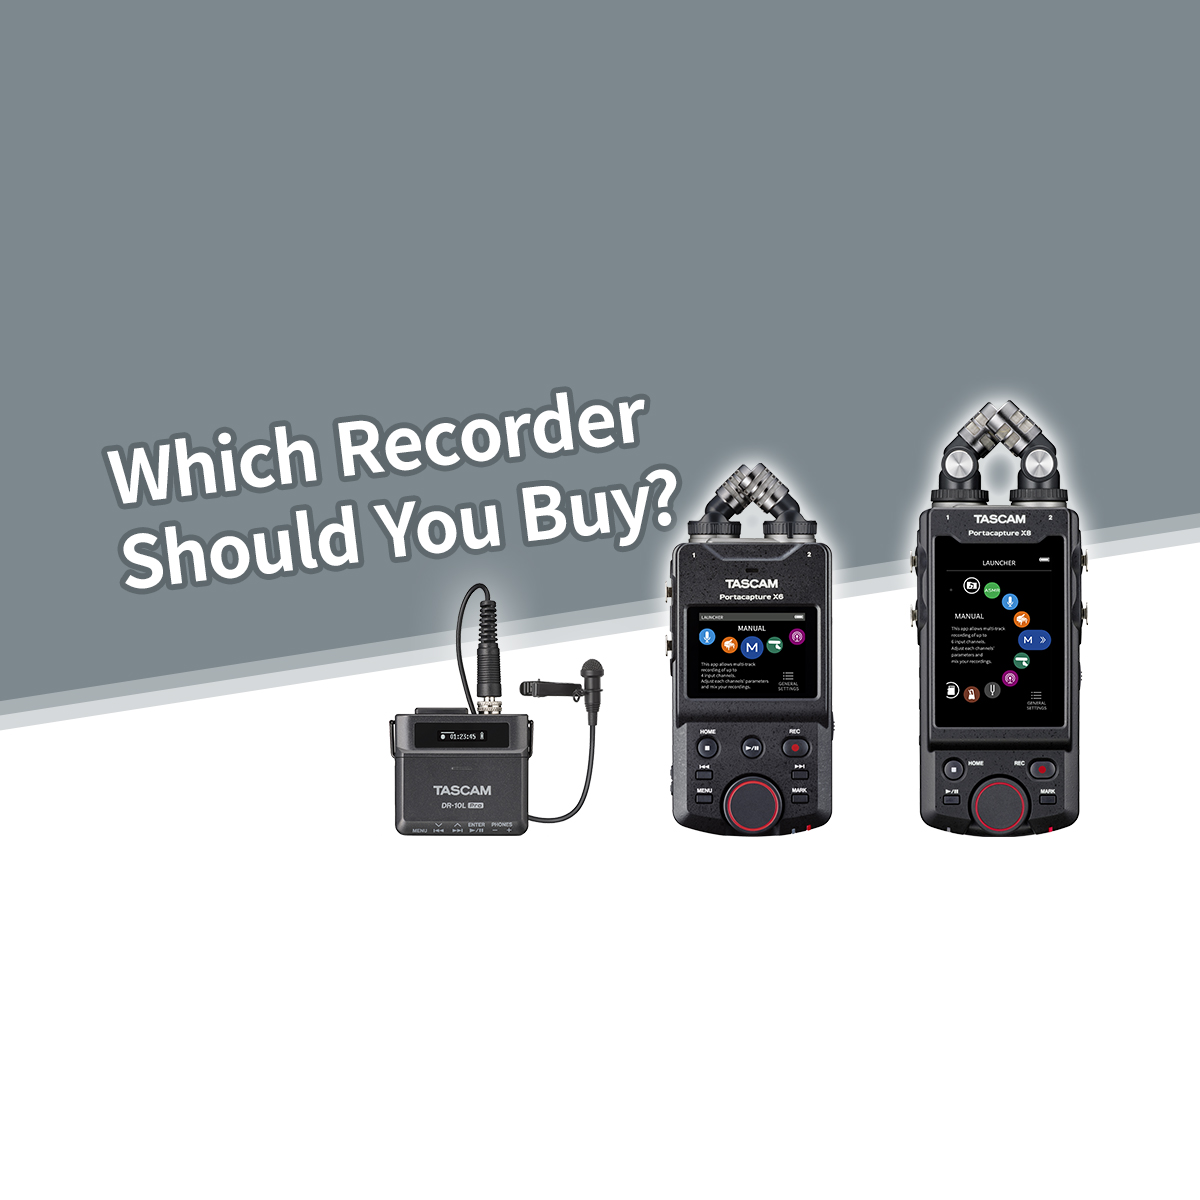 Which Recorder Should You Buy? A Consumer’s Guide to Choosing the Right Portable Recording Device